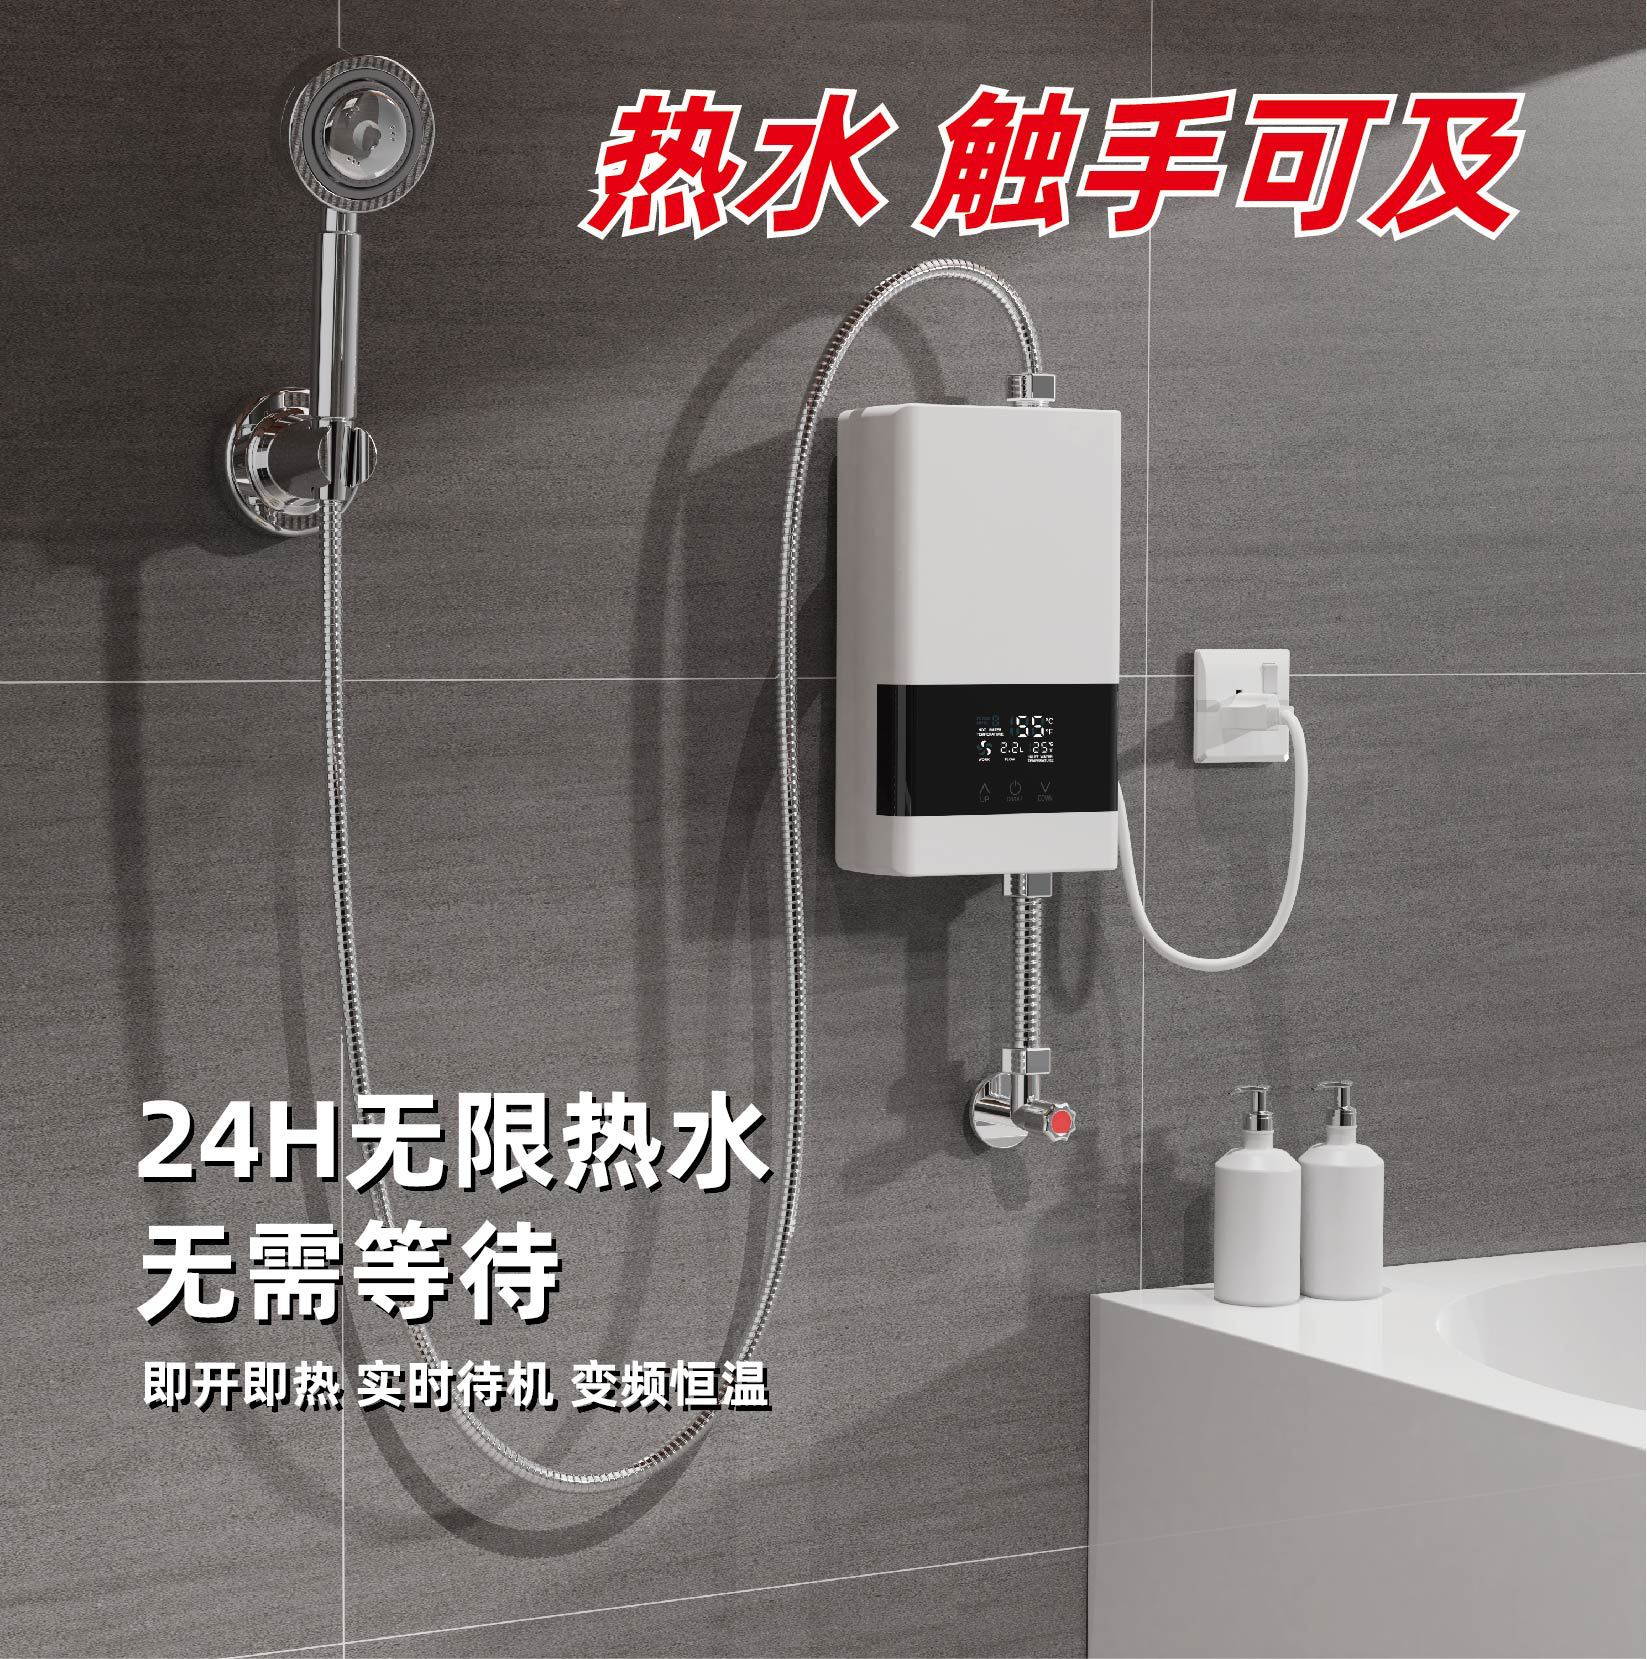 Instantaneous Water Heater For Household Quick-heating Kitchen, Kitchen Shower, Small Constant Temperature 110V